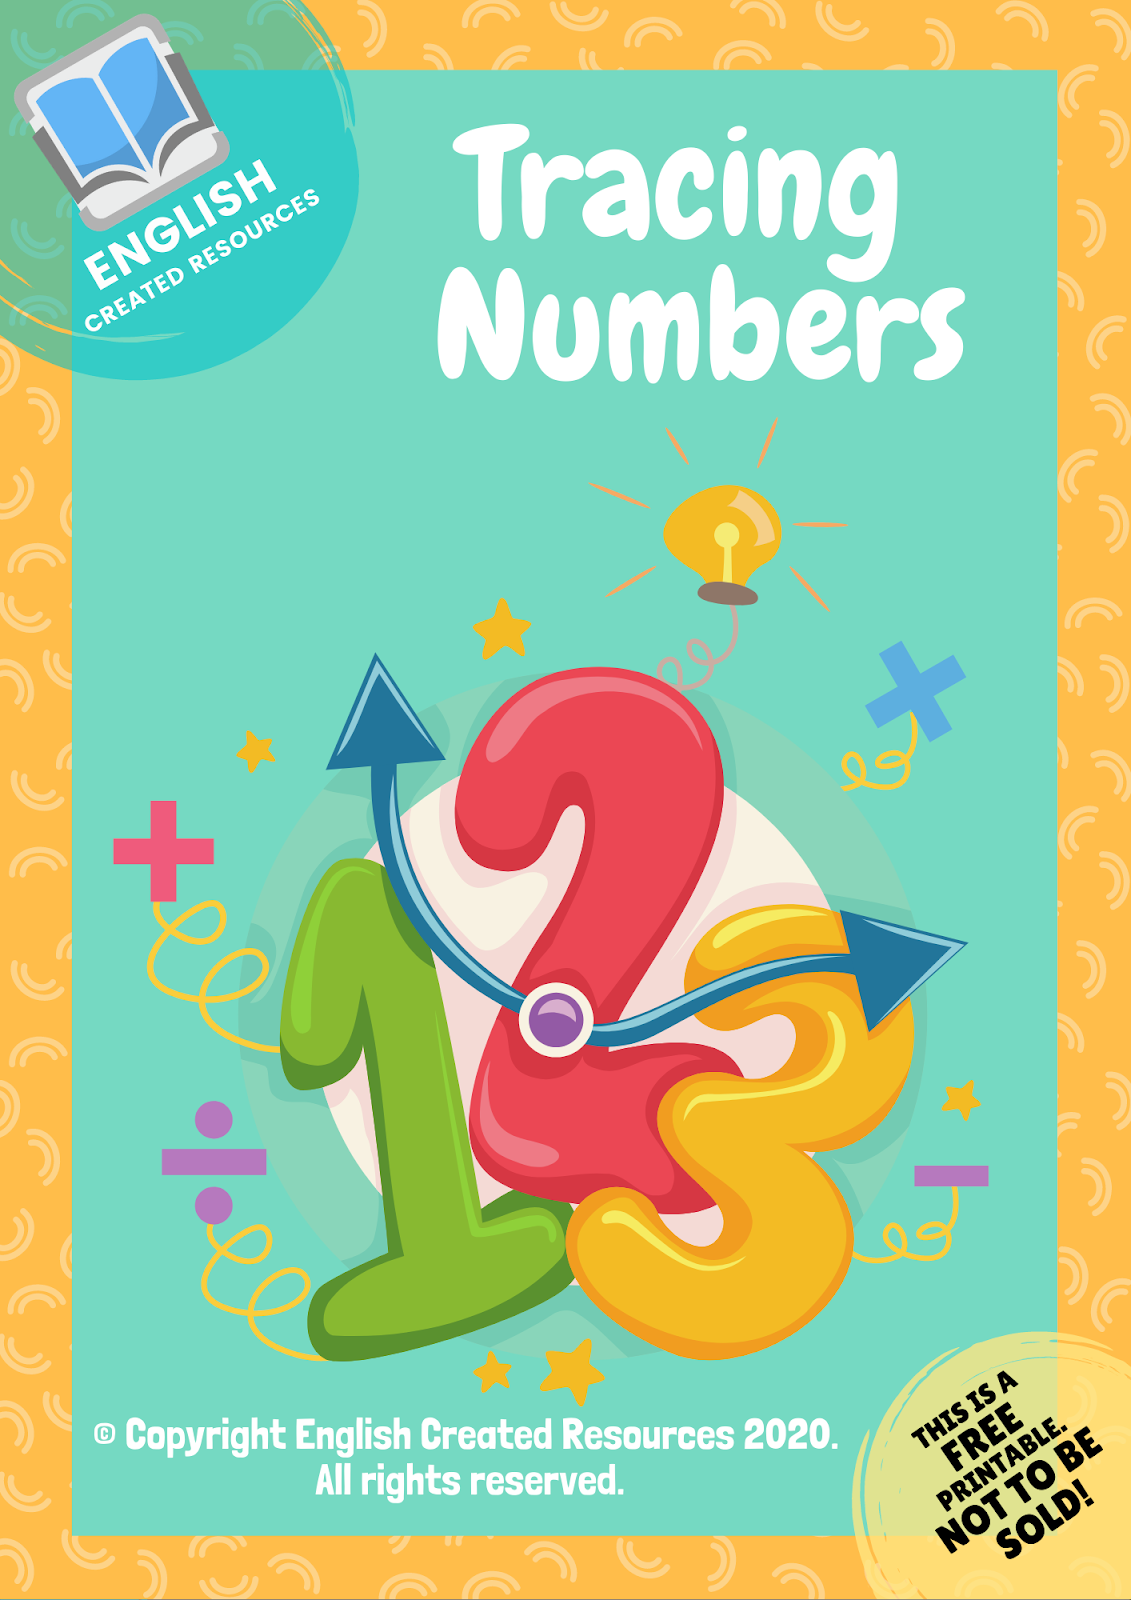 tracing-numbers-worksheets-english-created-resources